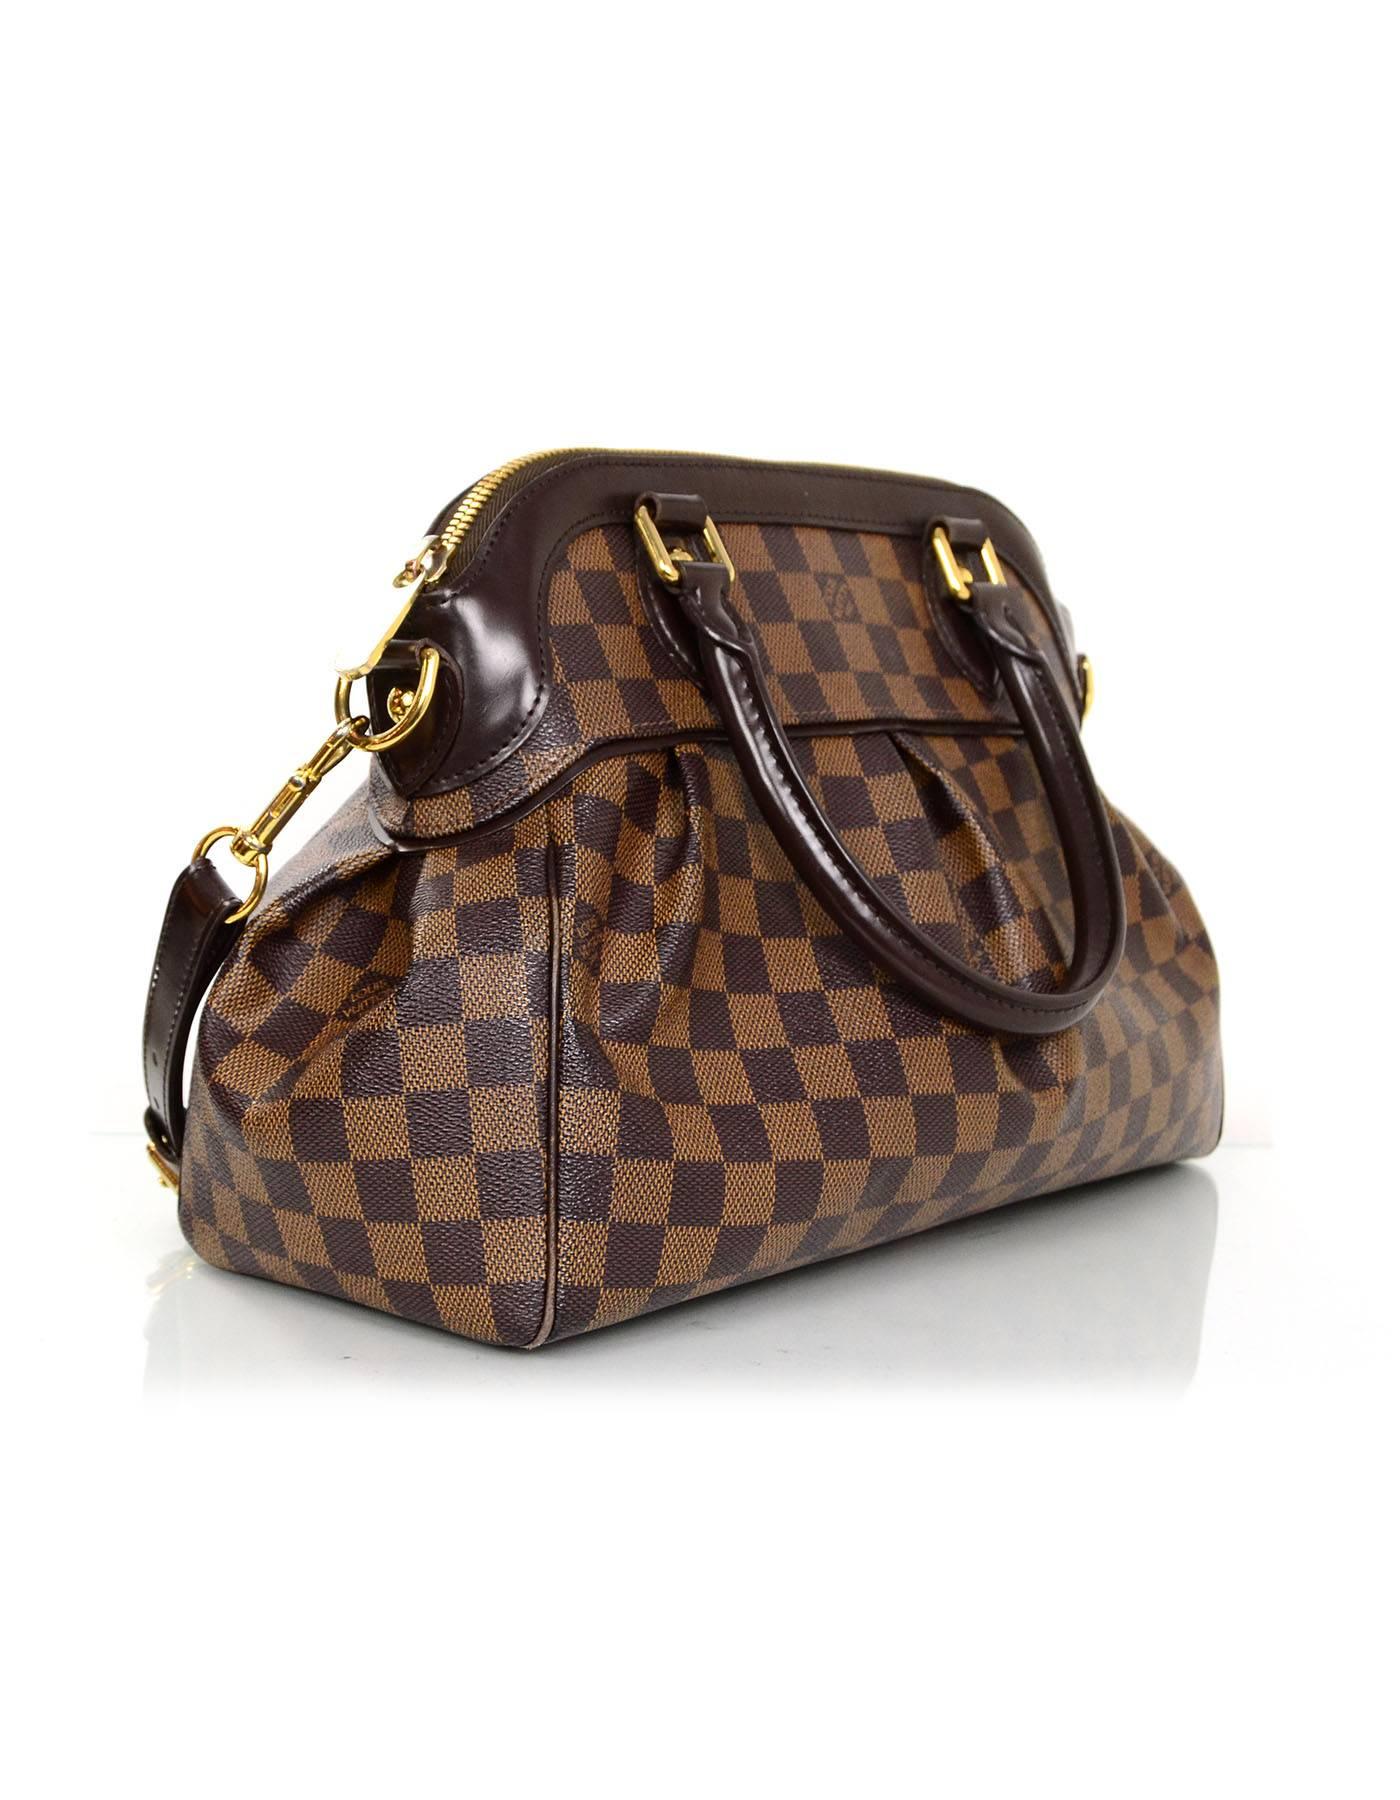 Louis Vuitton Damier Trevi PM Bag 

Features optional detachable shoulder strap
Made In: U.S.A
Year of Production: 2009
Color: Brown
Hardware: Goldtone
Materials: Coated canvas and leather
Lining: Rust orange microfiber
Closure/Opening: Zip